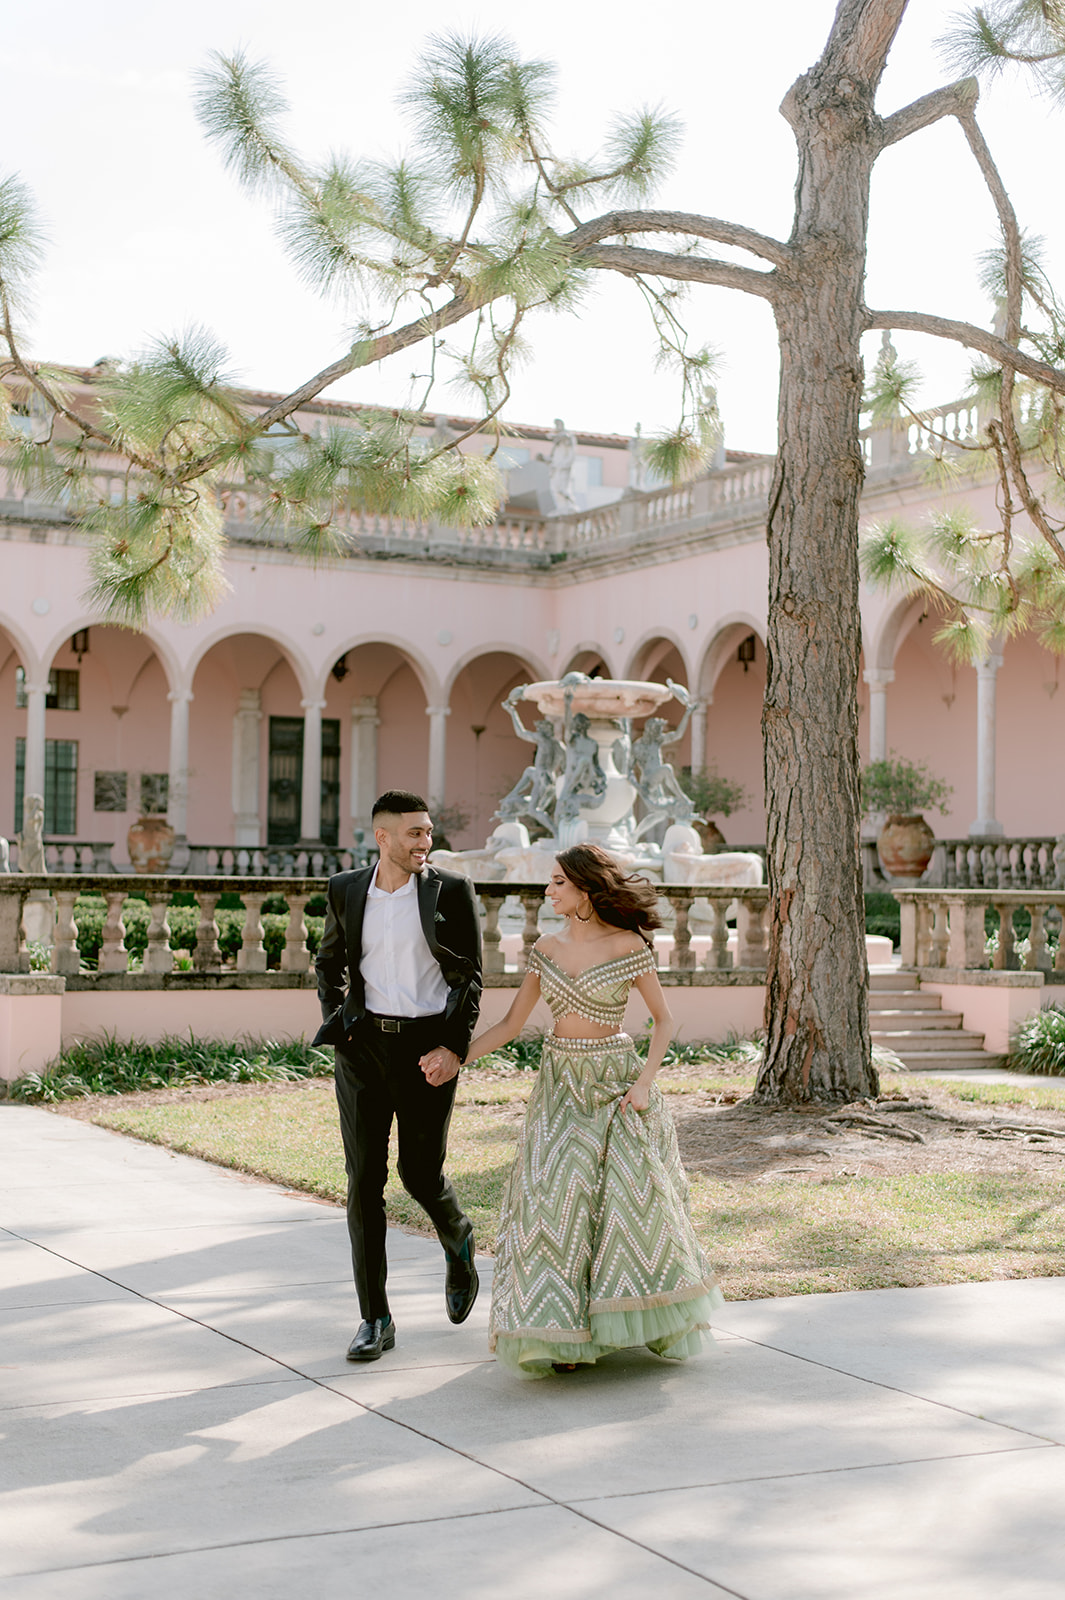 "Romantic and elegant engagement session at the John and Mable Ringling Museum"
